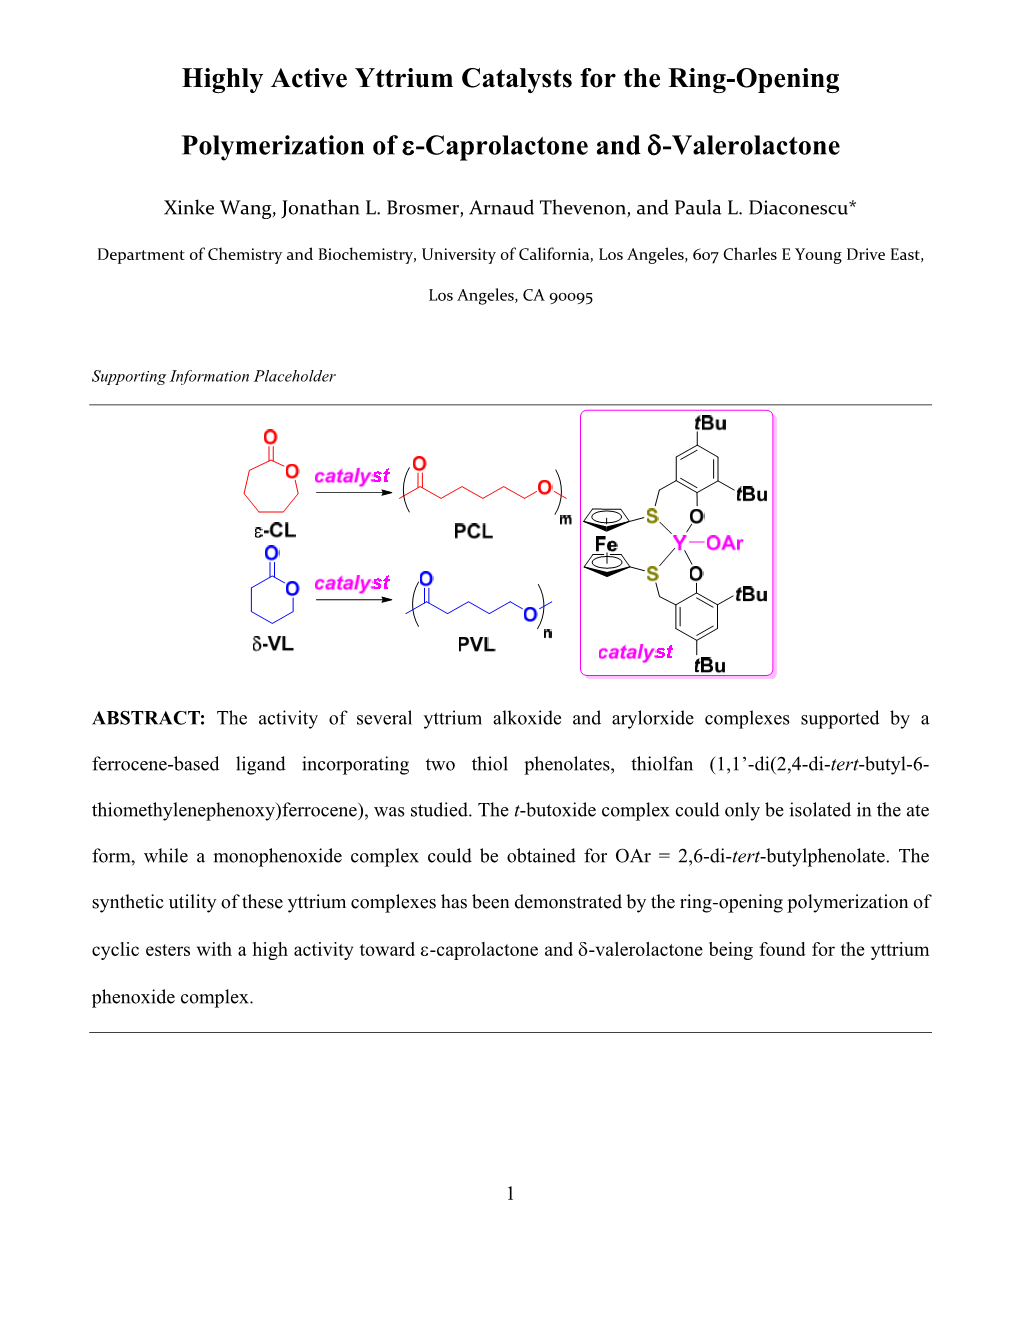 Highly Active Yttrium Catalysts for the Ring-Opening Polymerization of Ε